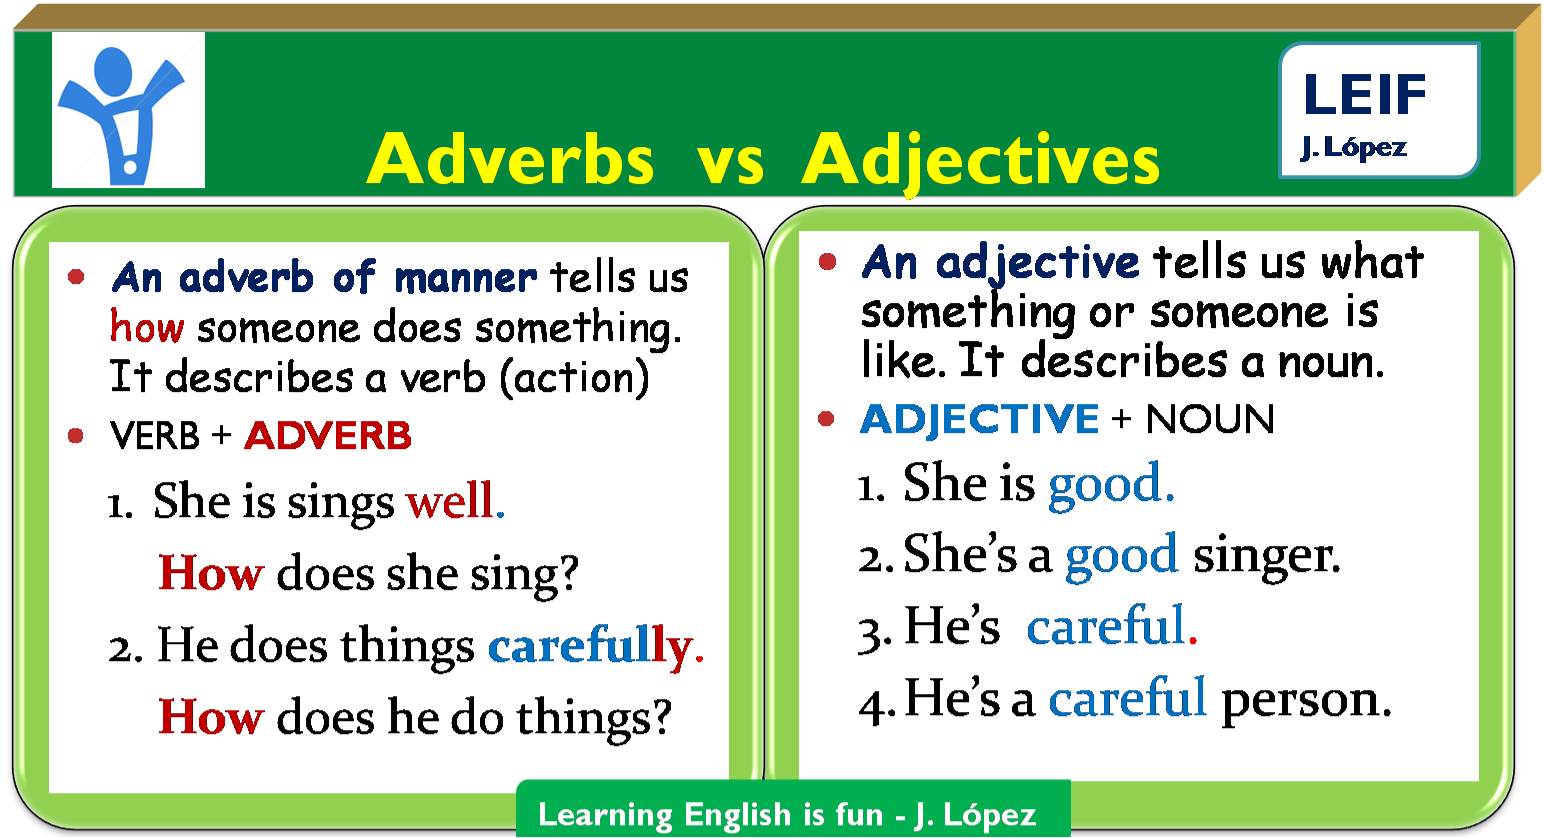 adverb-of-manner-long-english-grammar-forming-adverbs-from-adjectives-esl-buzz-adverbs-of